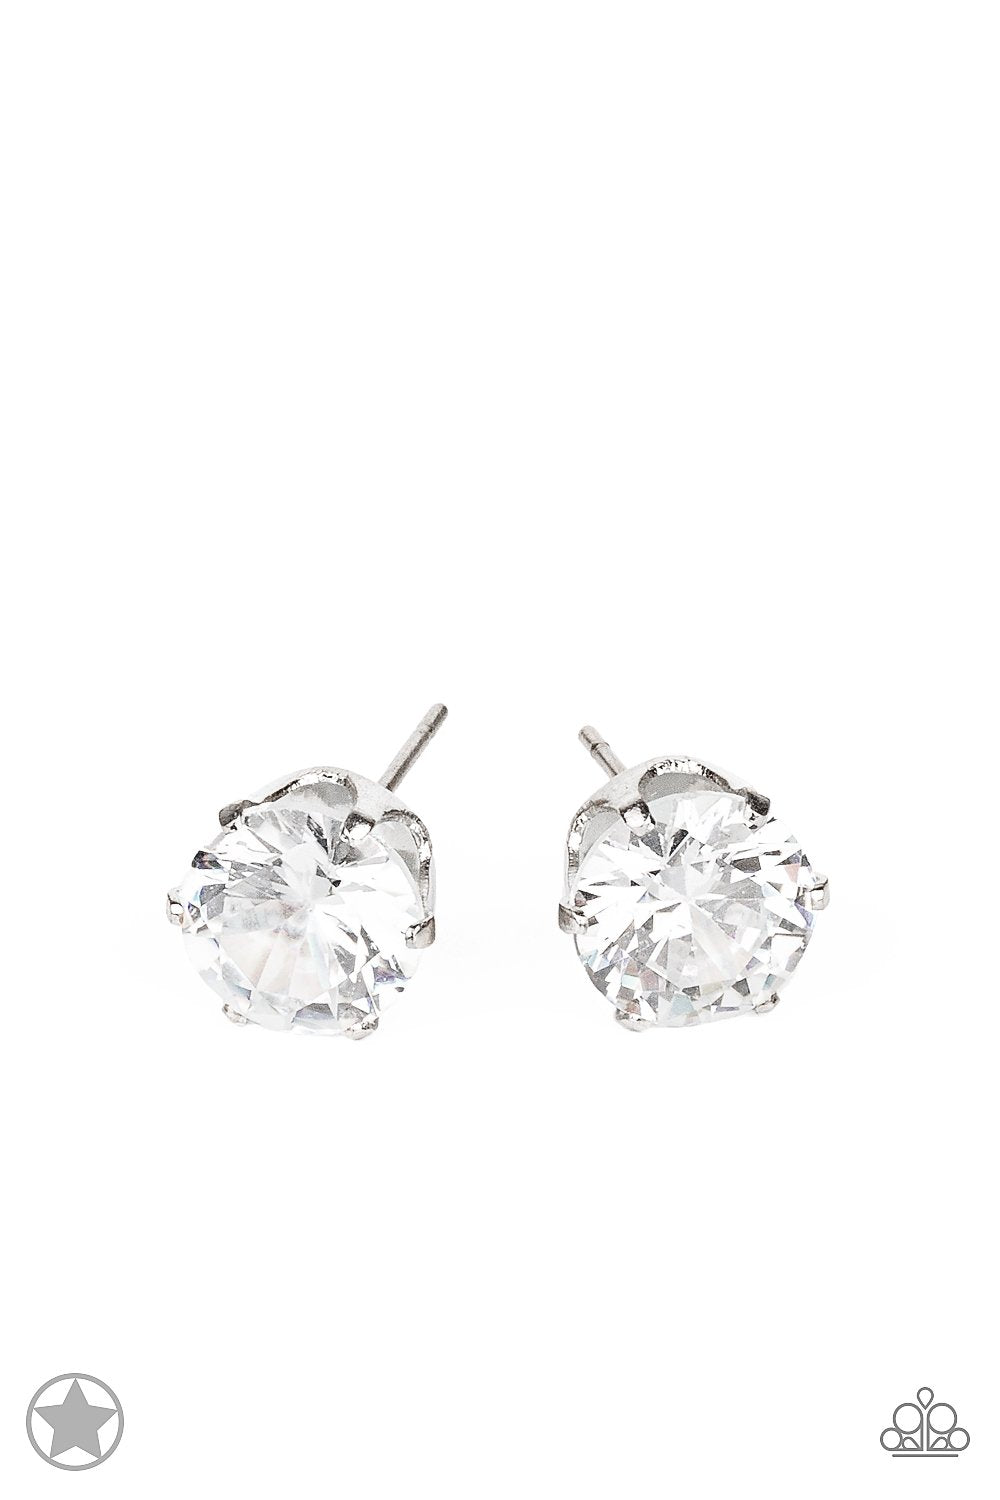 Just in Timeless White Rhinestone and Silver Post Earrings - Paparazzi Accessories - lightbox -CarasShop.com - $5 Jewelry by Cara Jewels